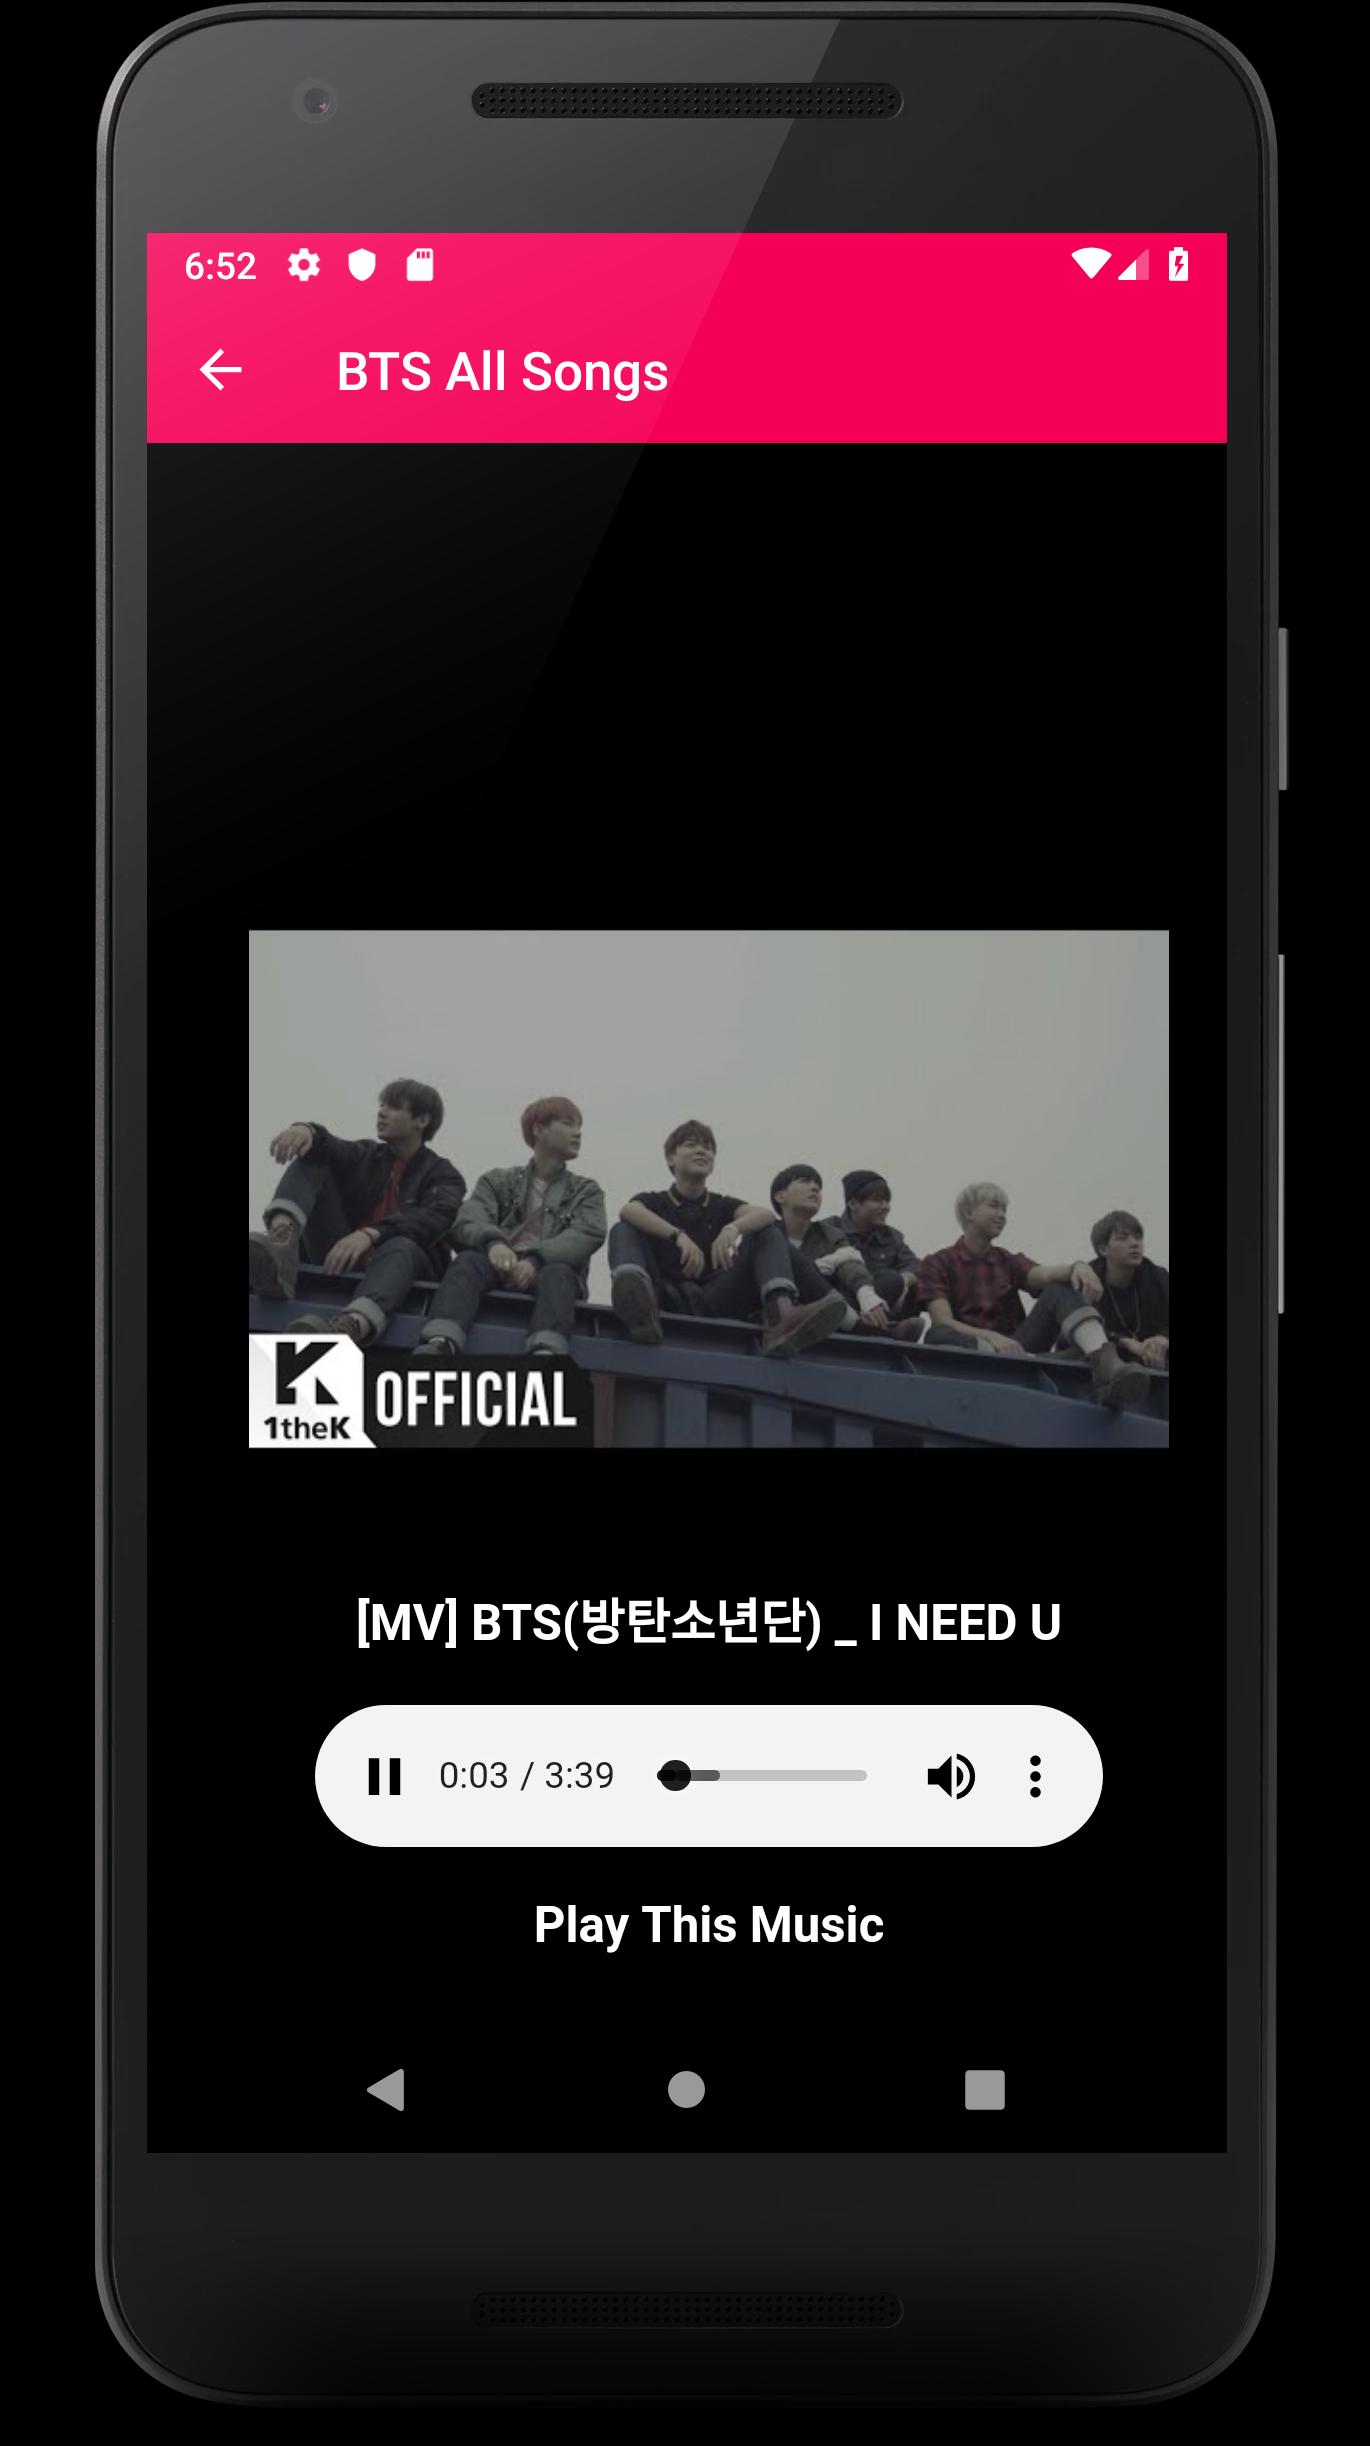 Bts All Music Video 2019 For Android Apk Download - bts gogo song id for roblox